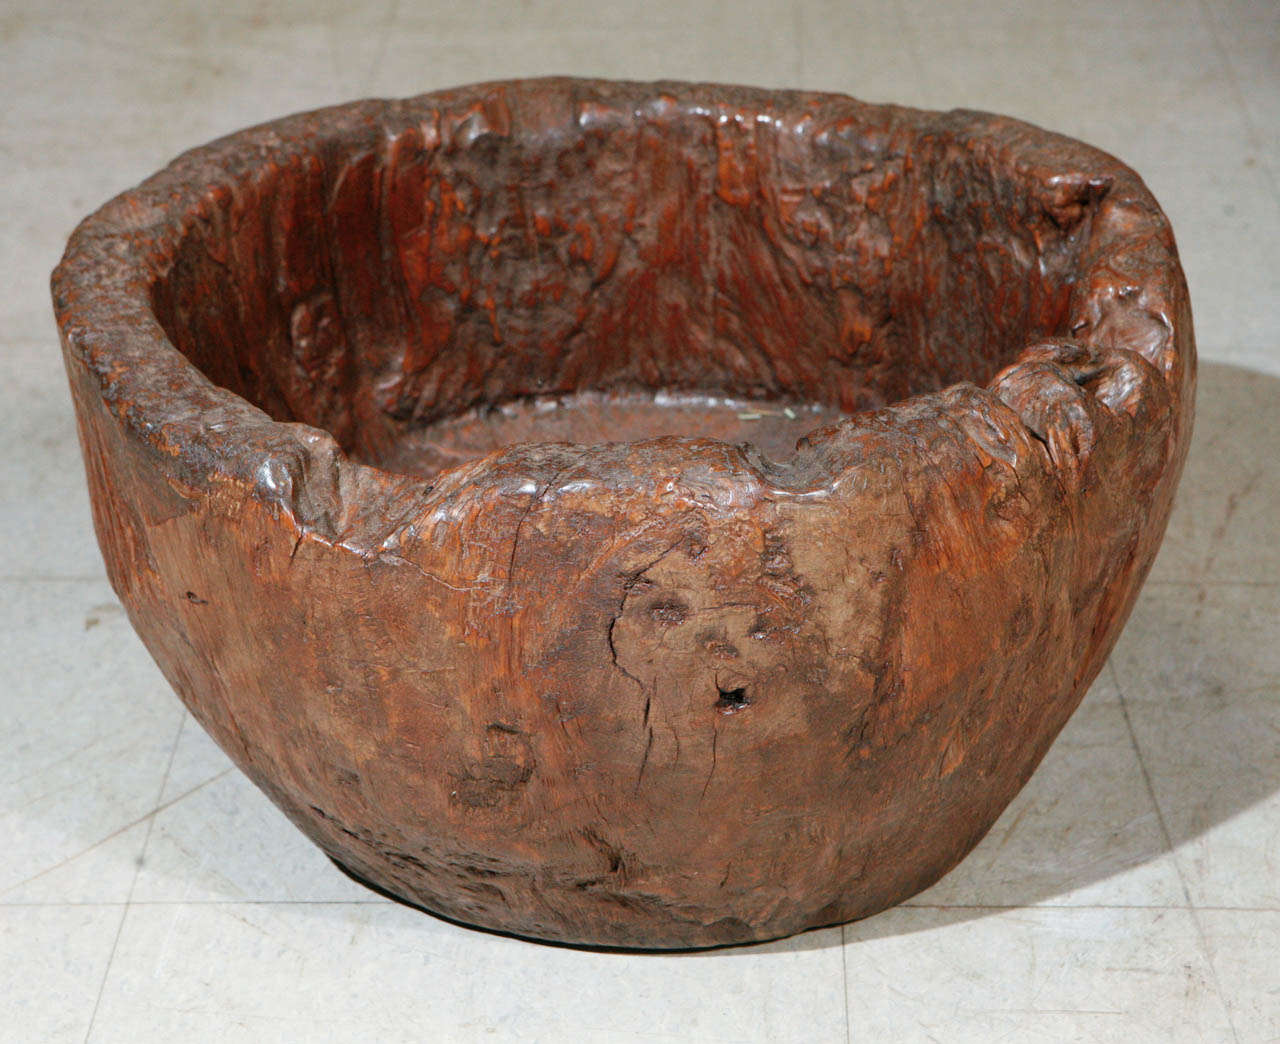 Antique mortar bowl from a granary, dense and intriguing teak burl hardwood. Rare, rural Java, circa early 19th century.